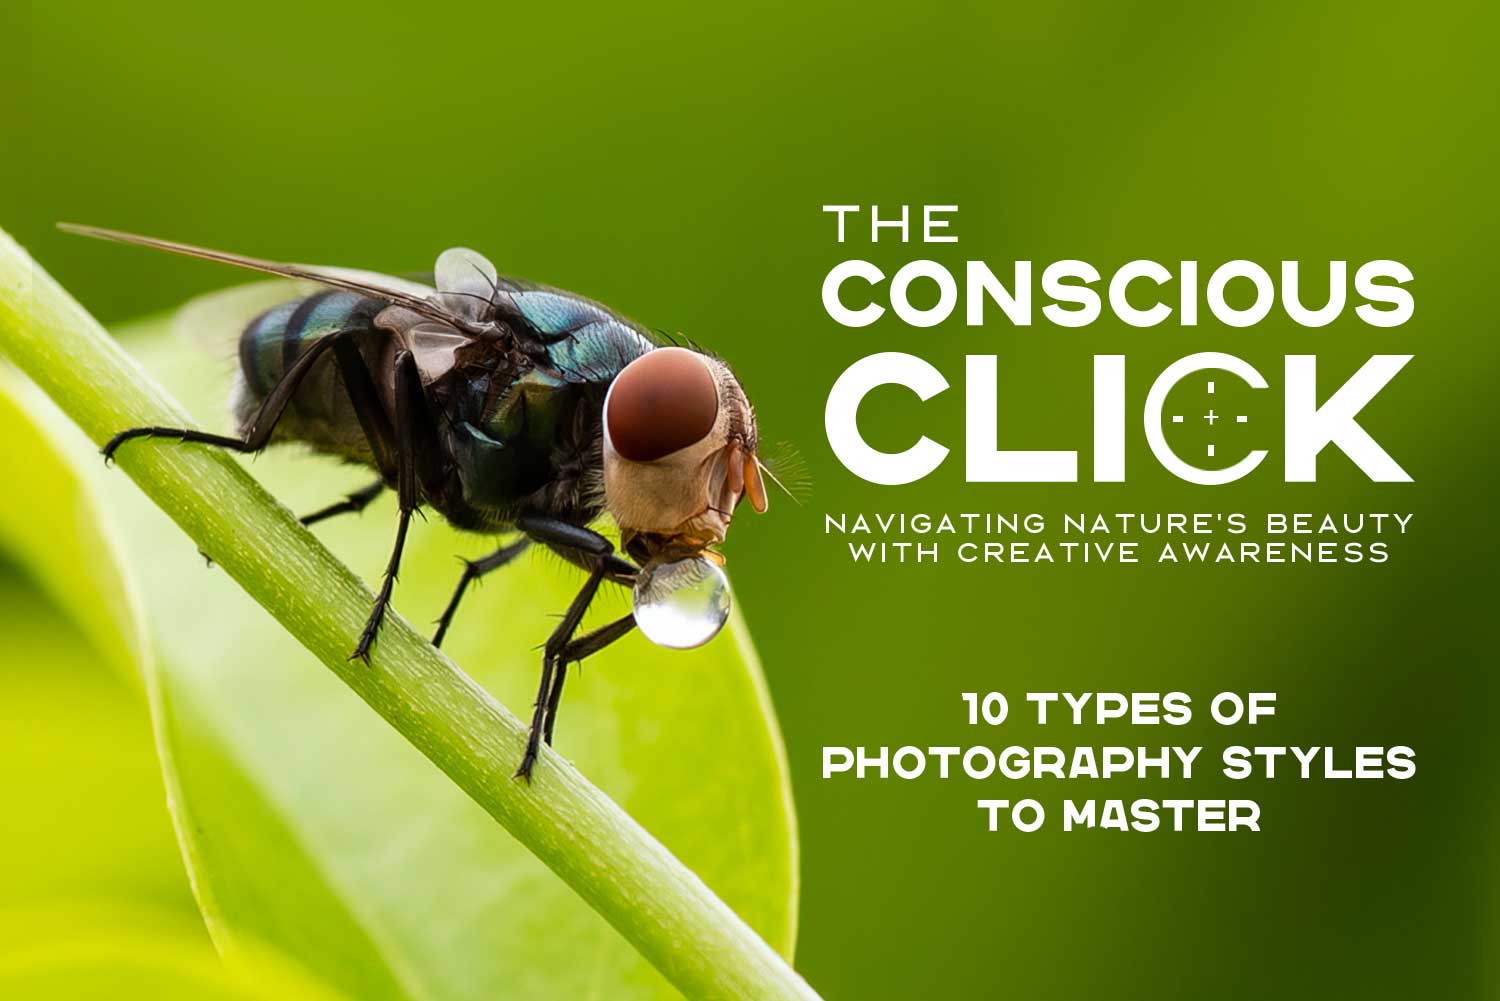 The Conscious Click: Navigating Nature’s Beauty with Creative Awareness – 10 Types of Photography Styles to Master